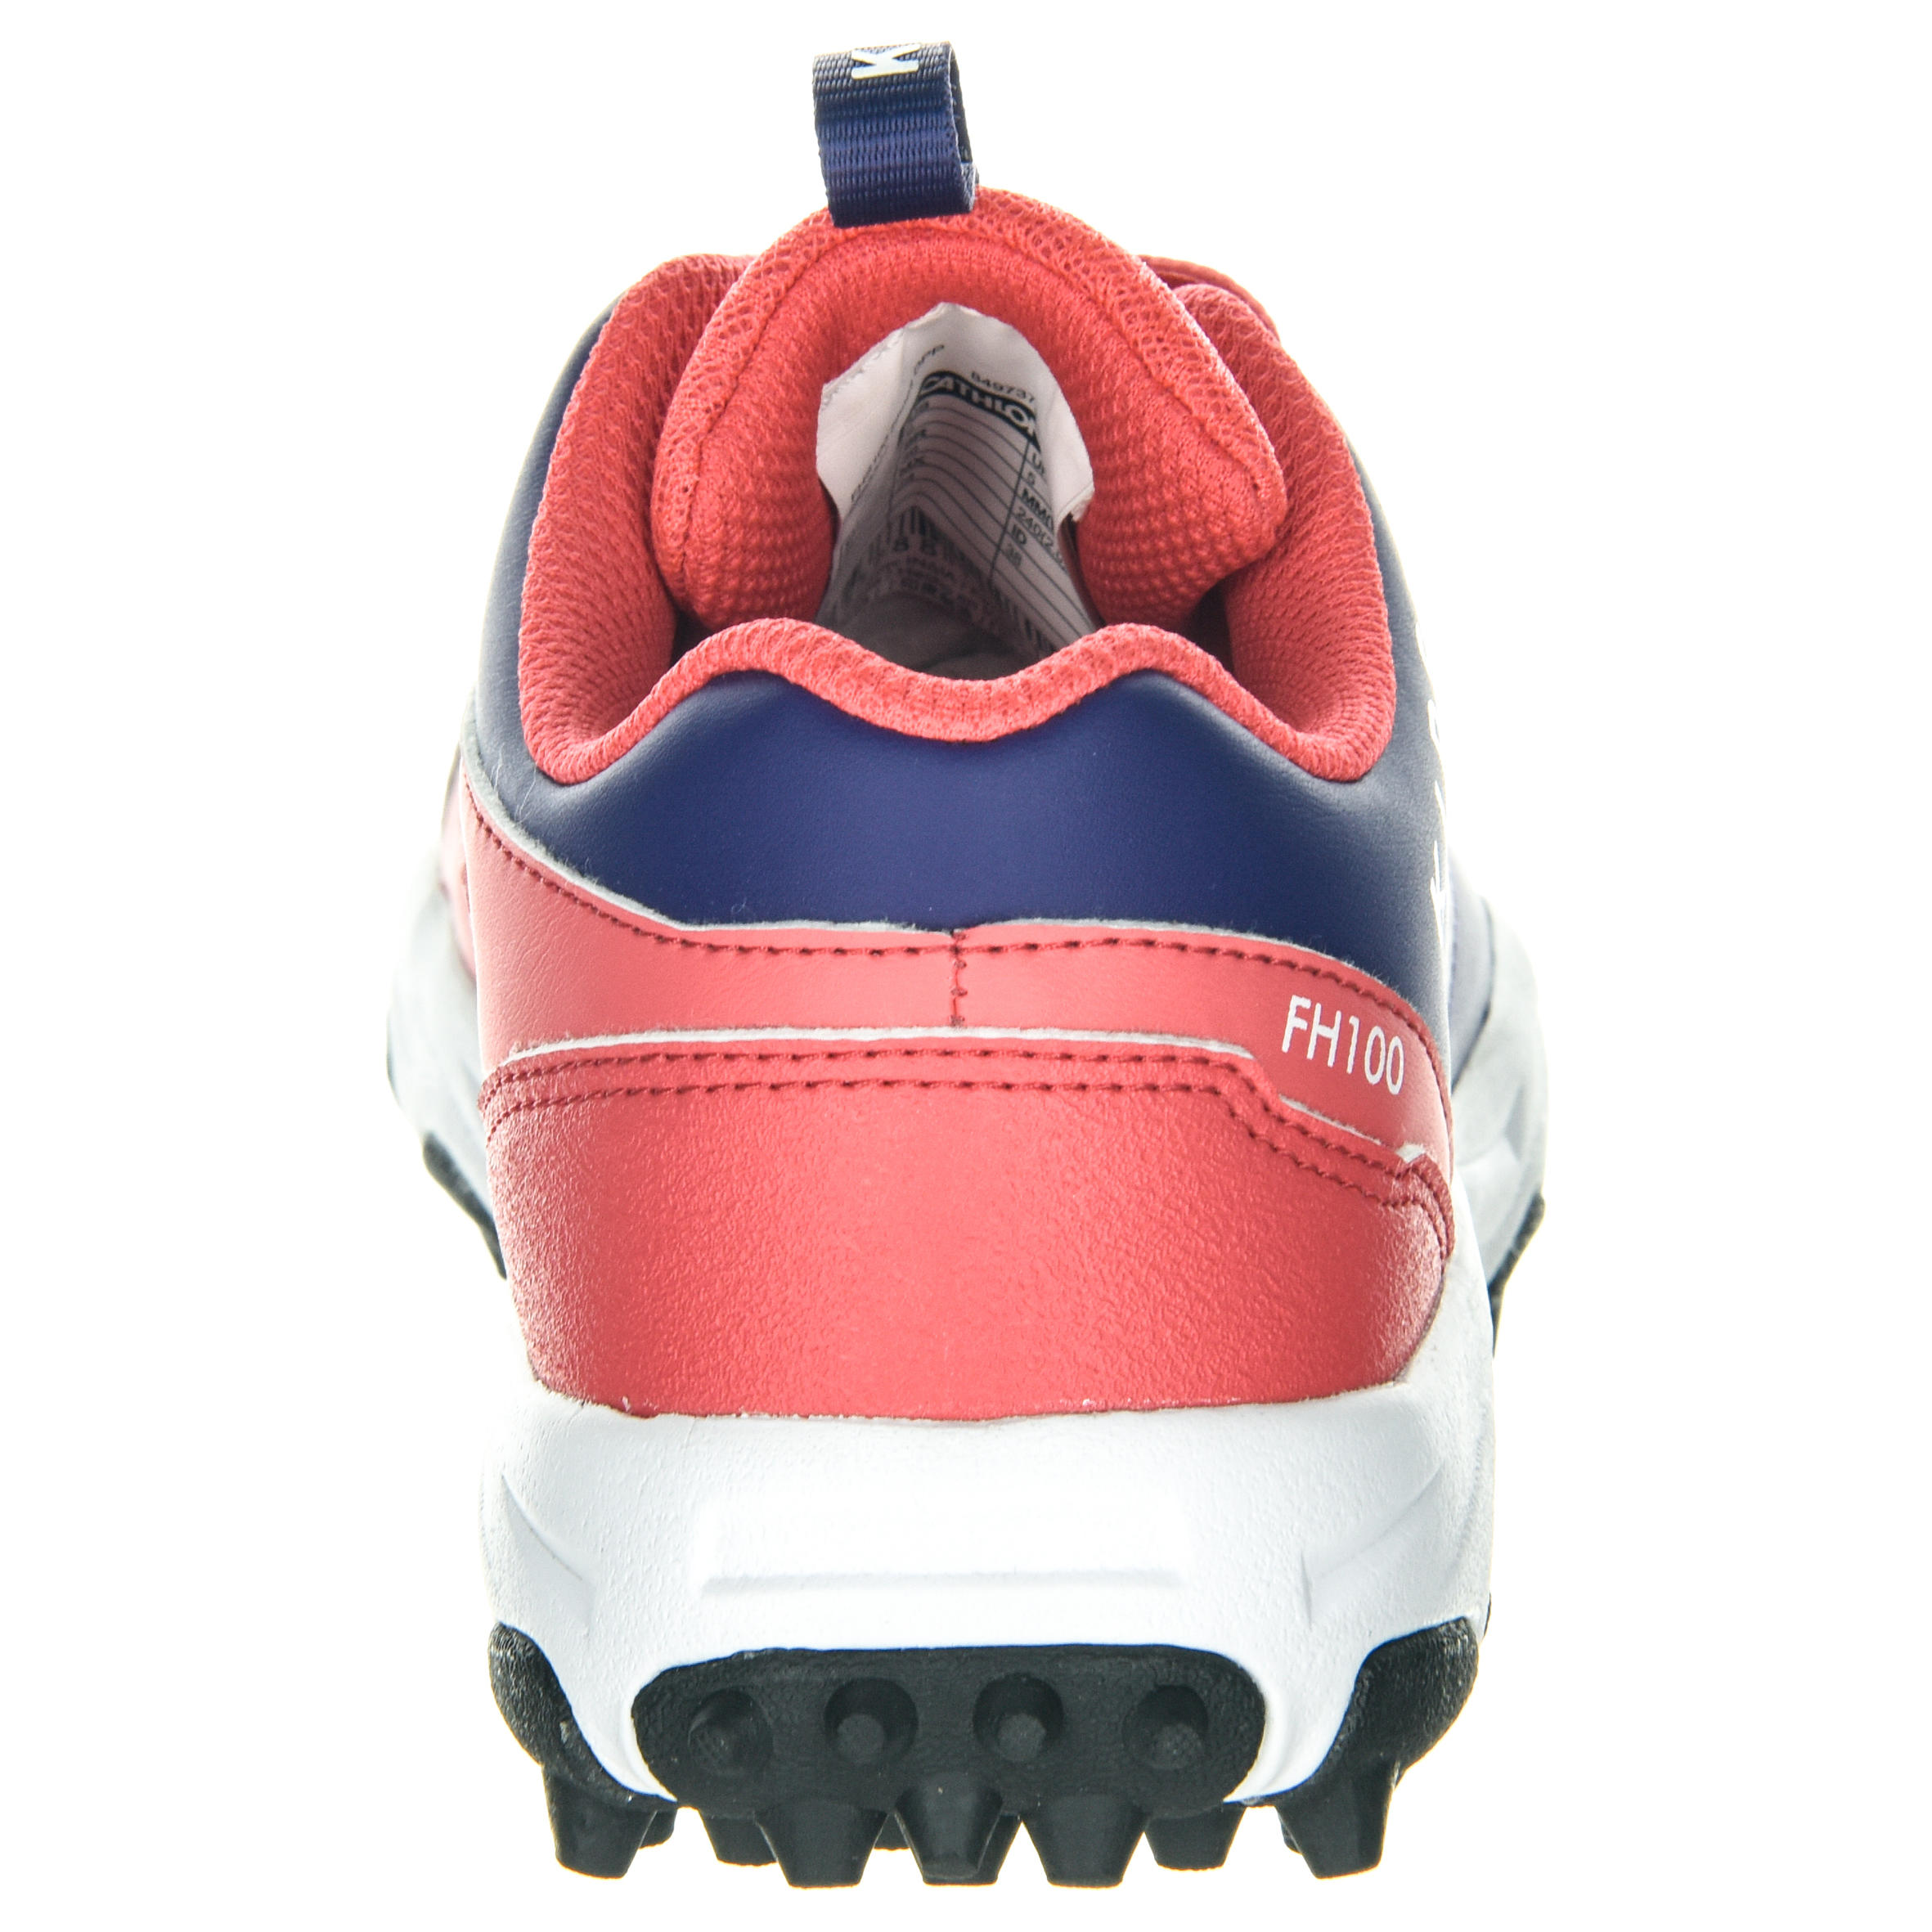 FH100 Kids' Low to Medium Intensity Field Hockey Shoes - Pink 5/13